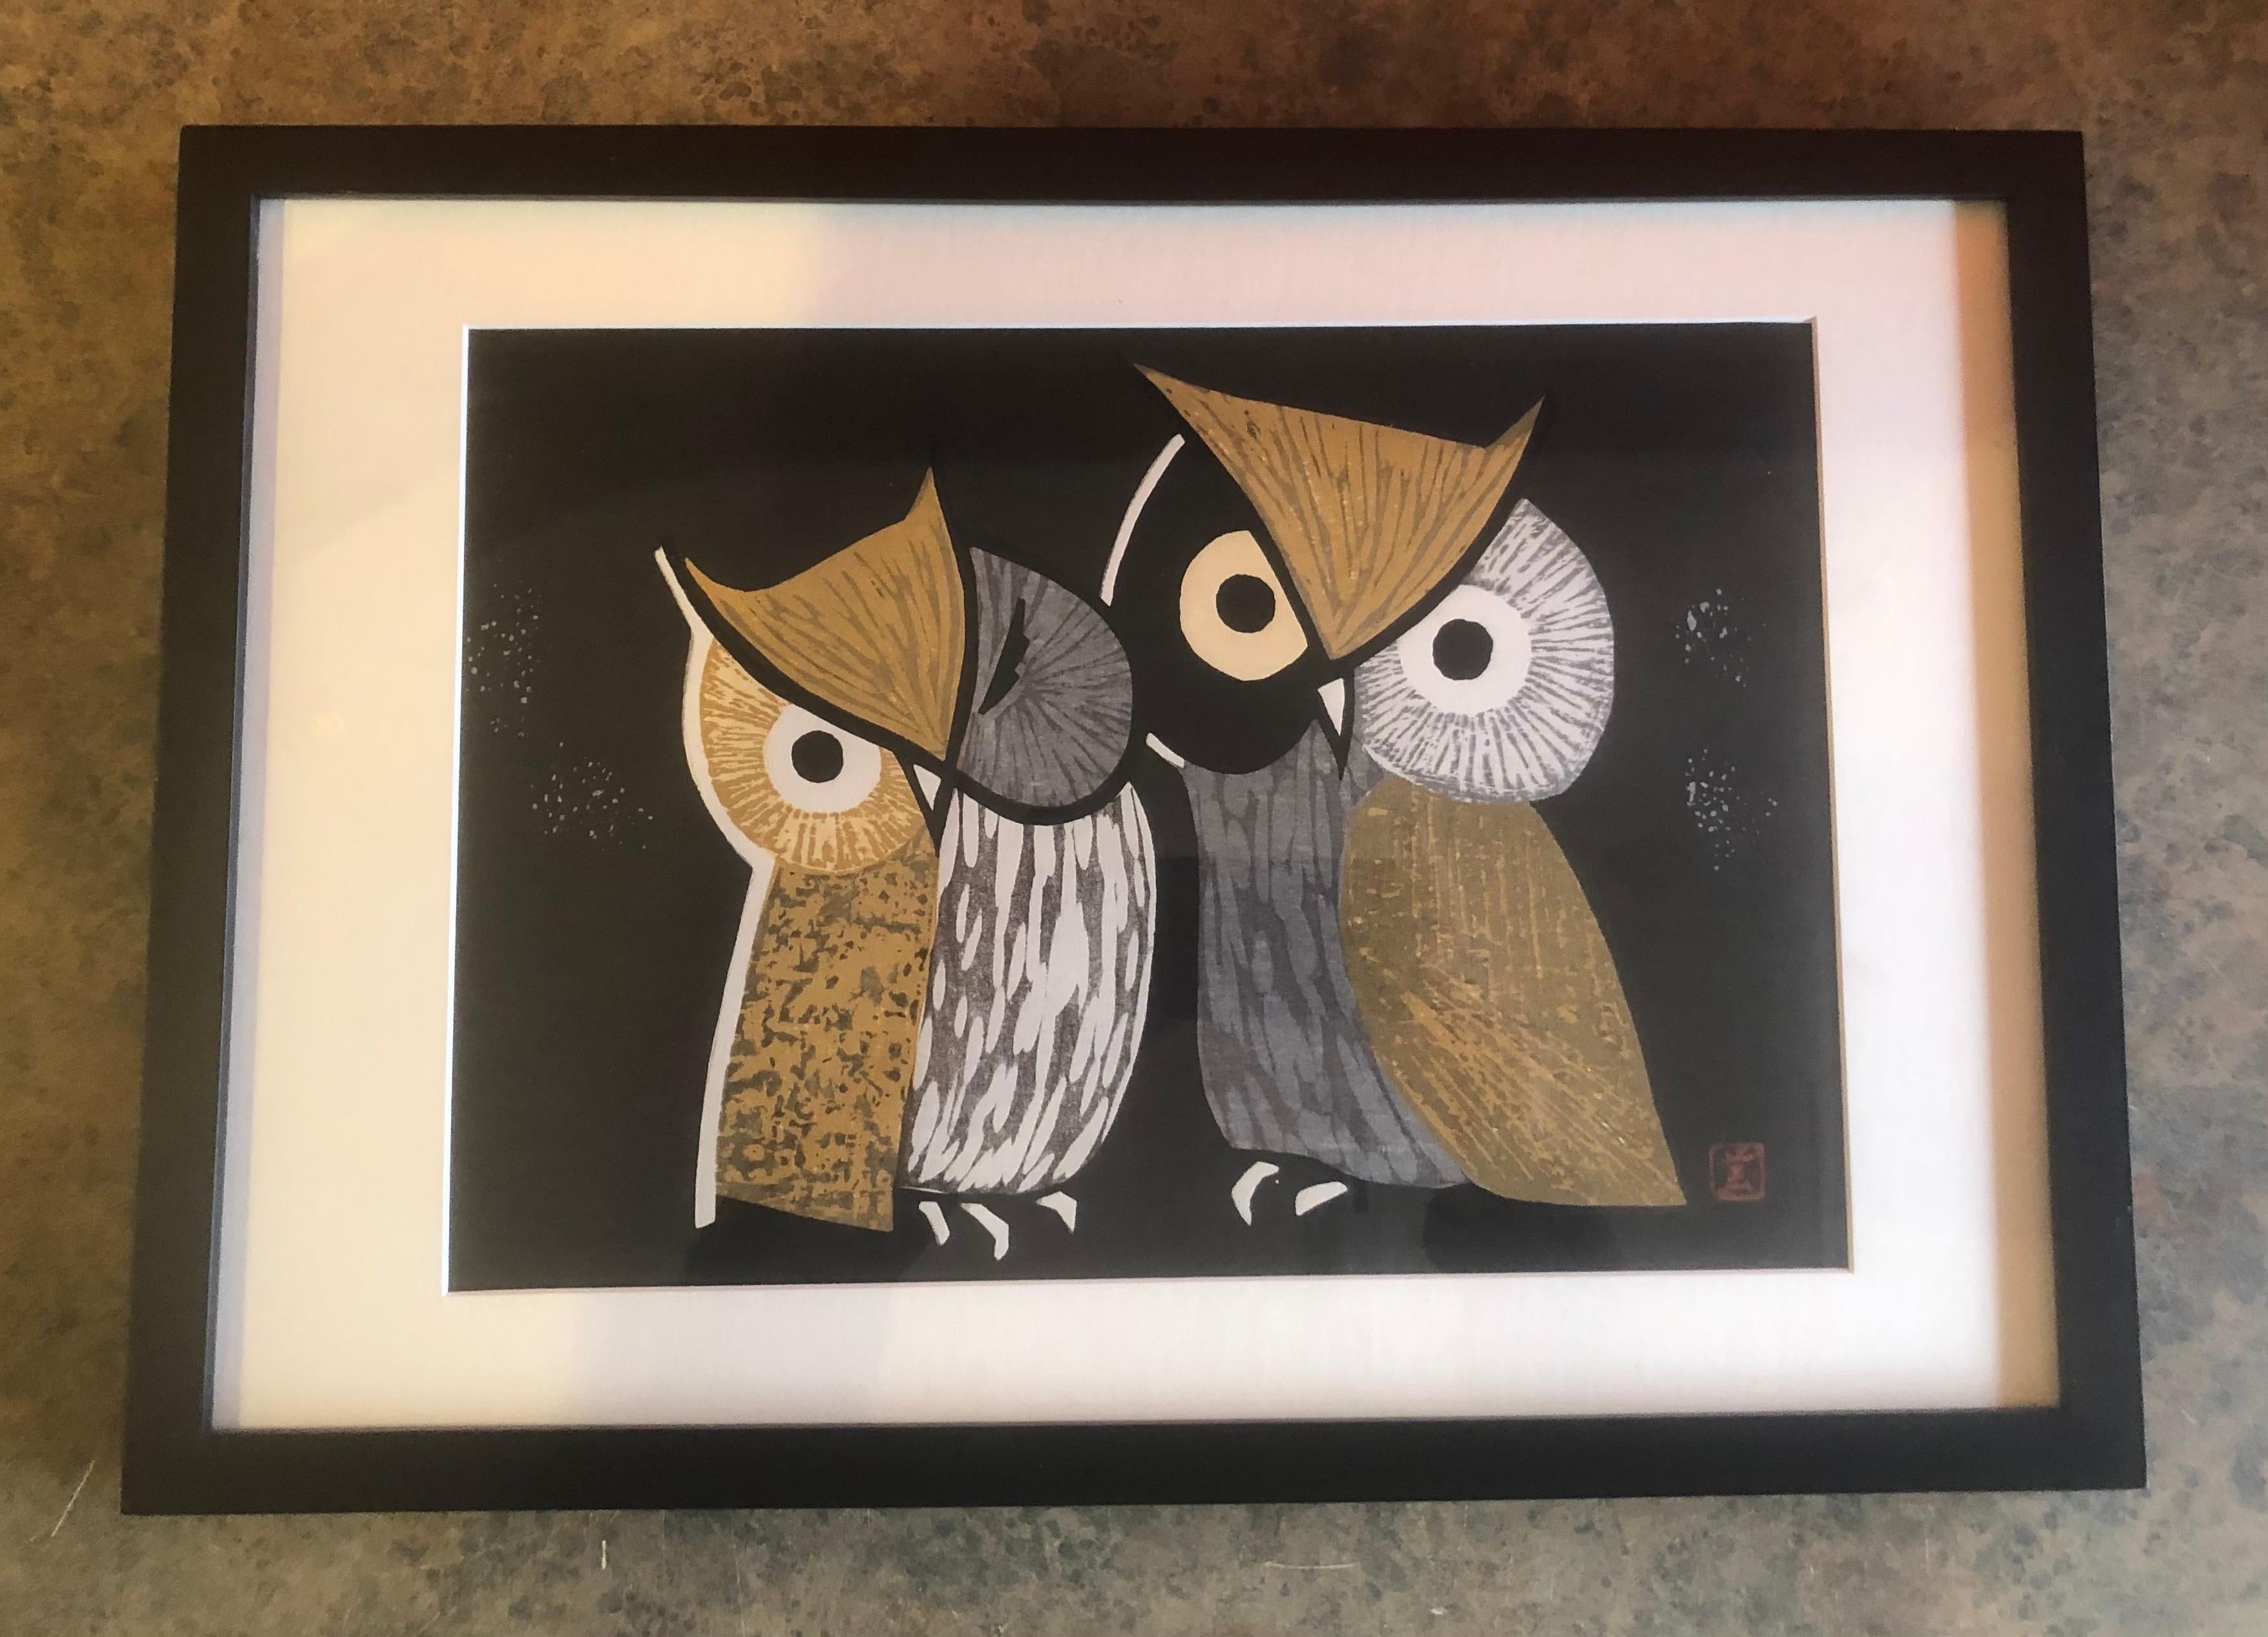 Mid-century wood block print of two owls known as 